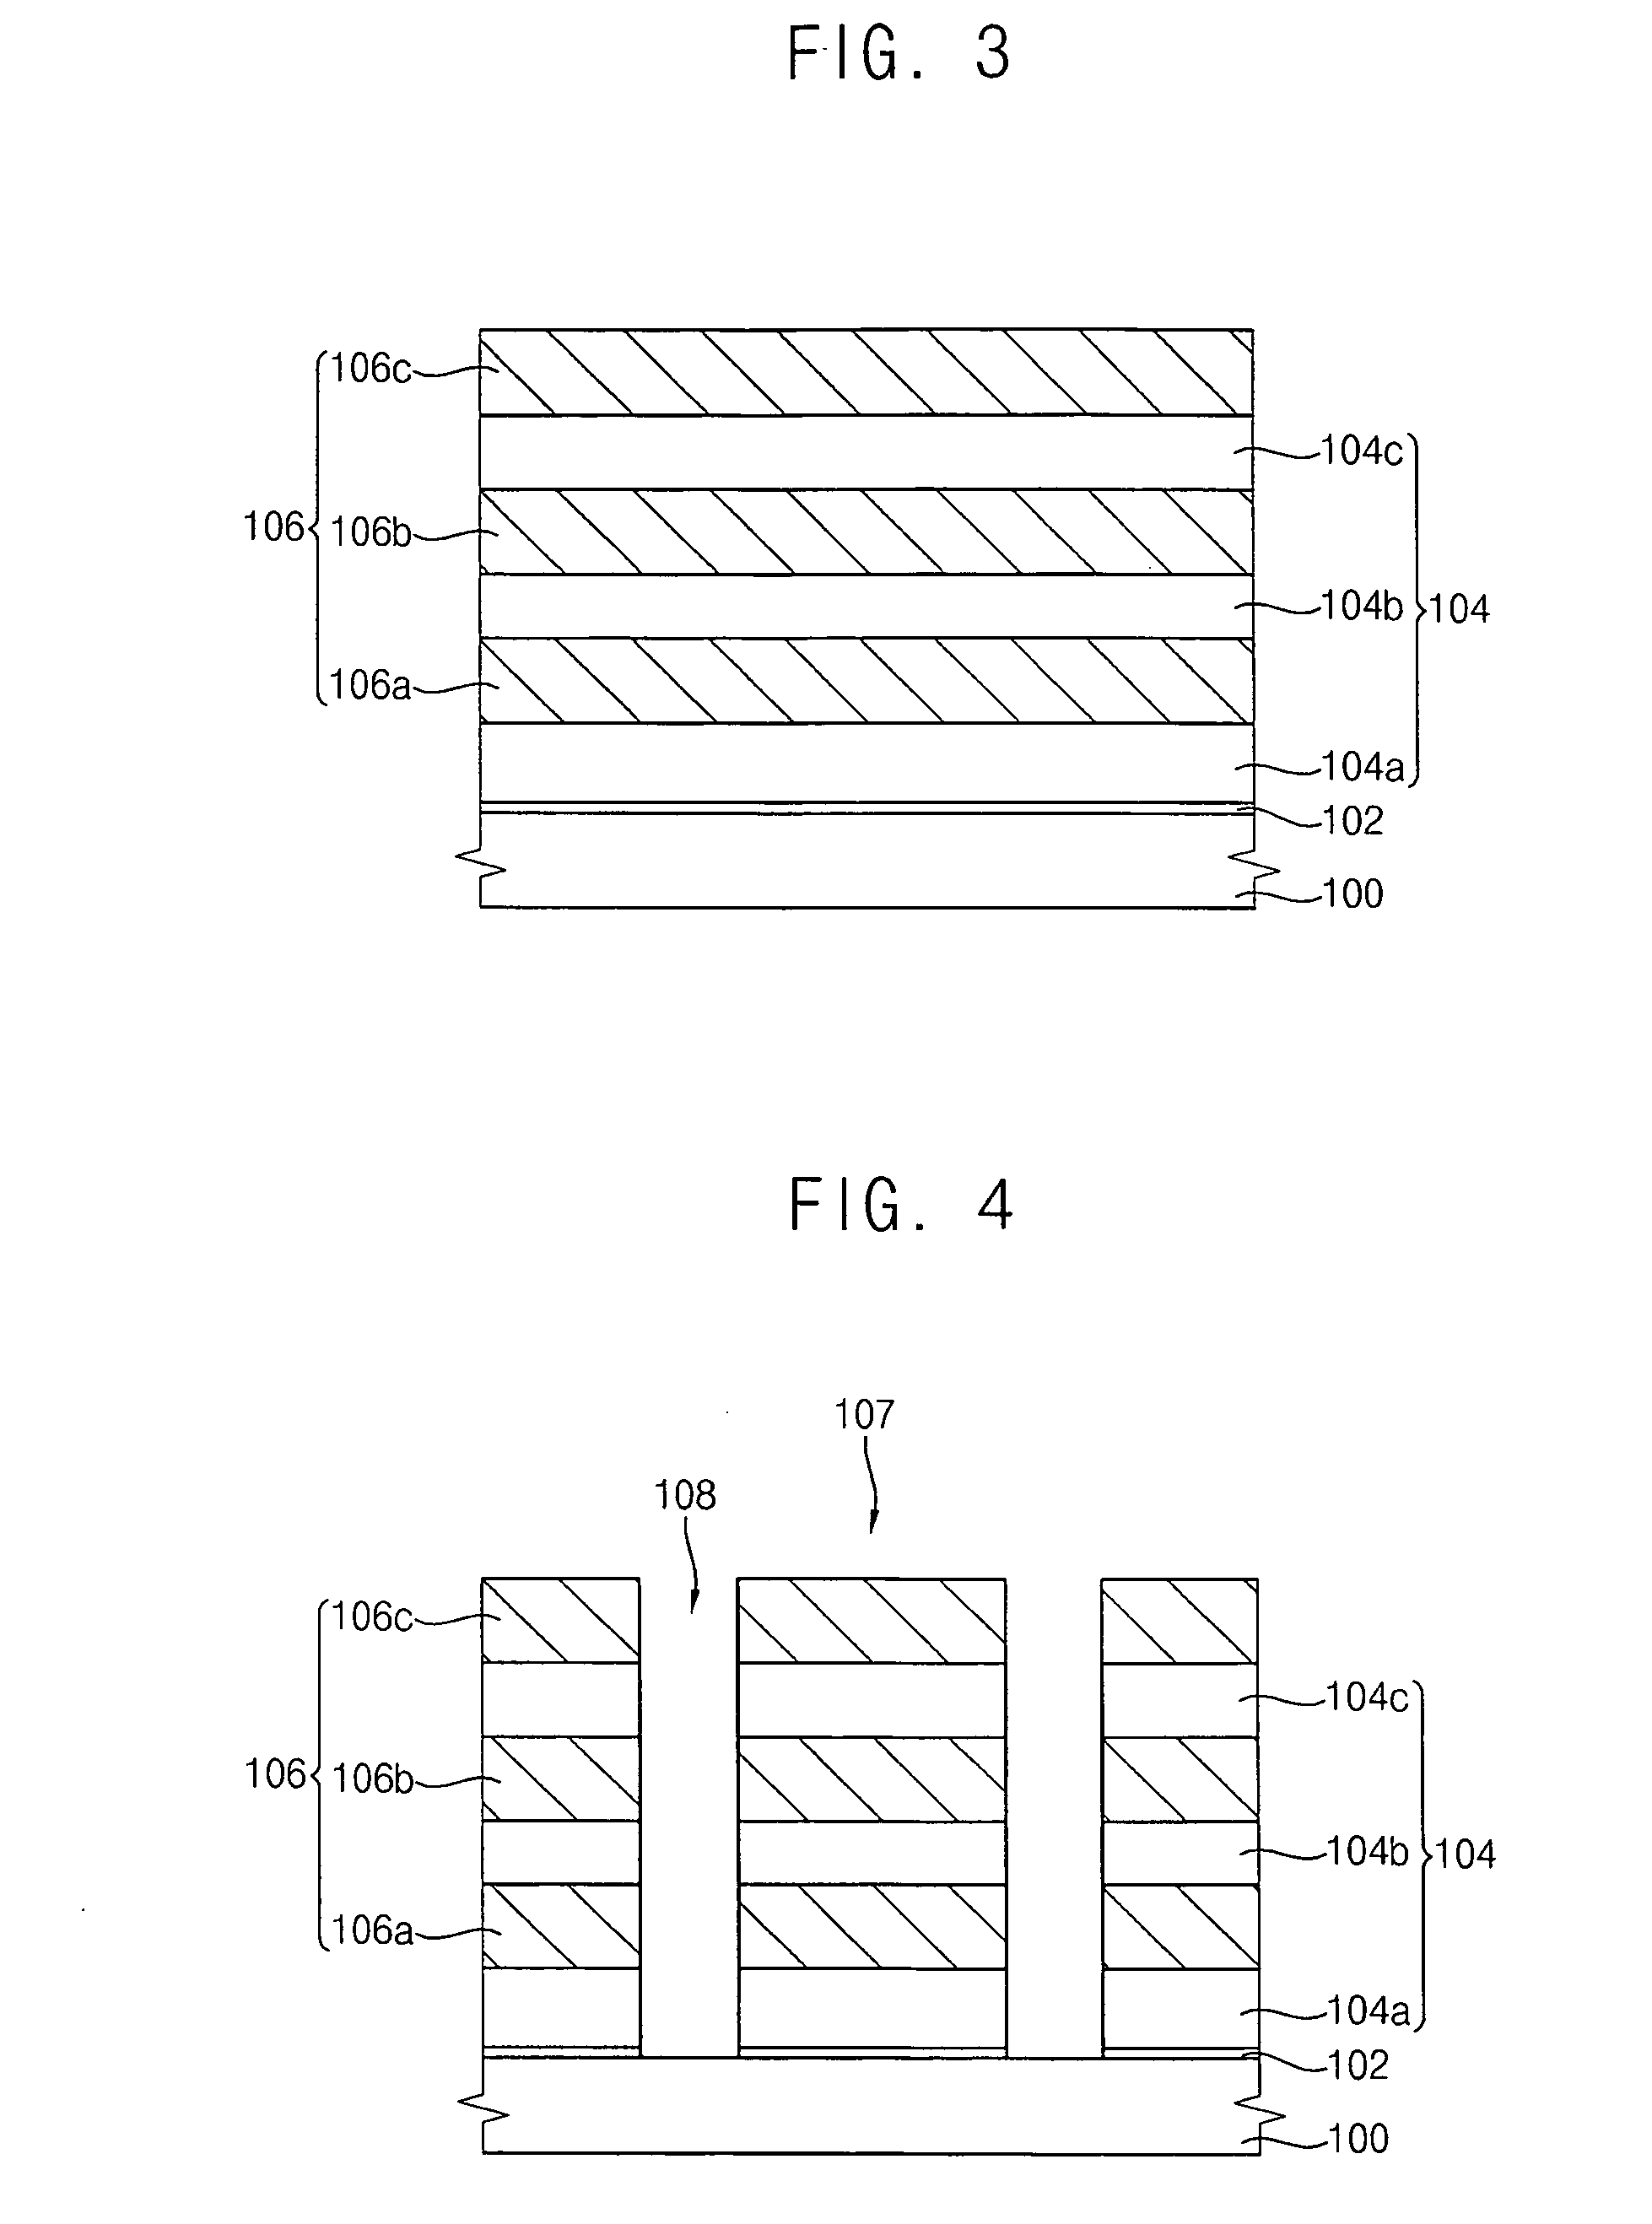 Vertical-type semiconductor devices